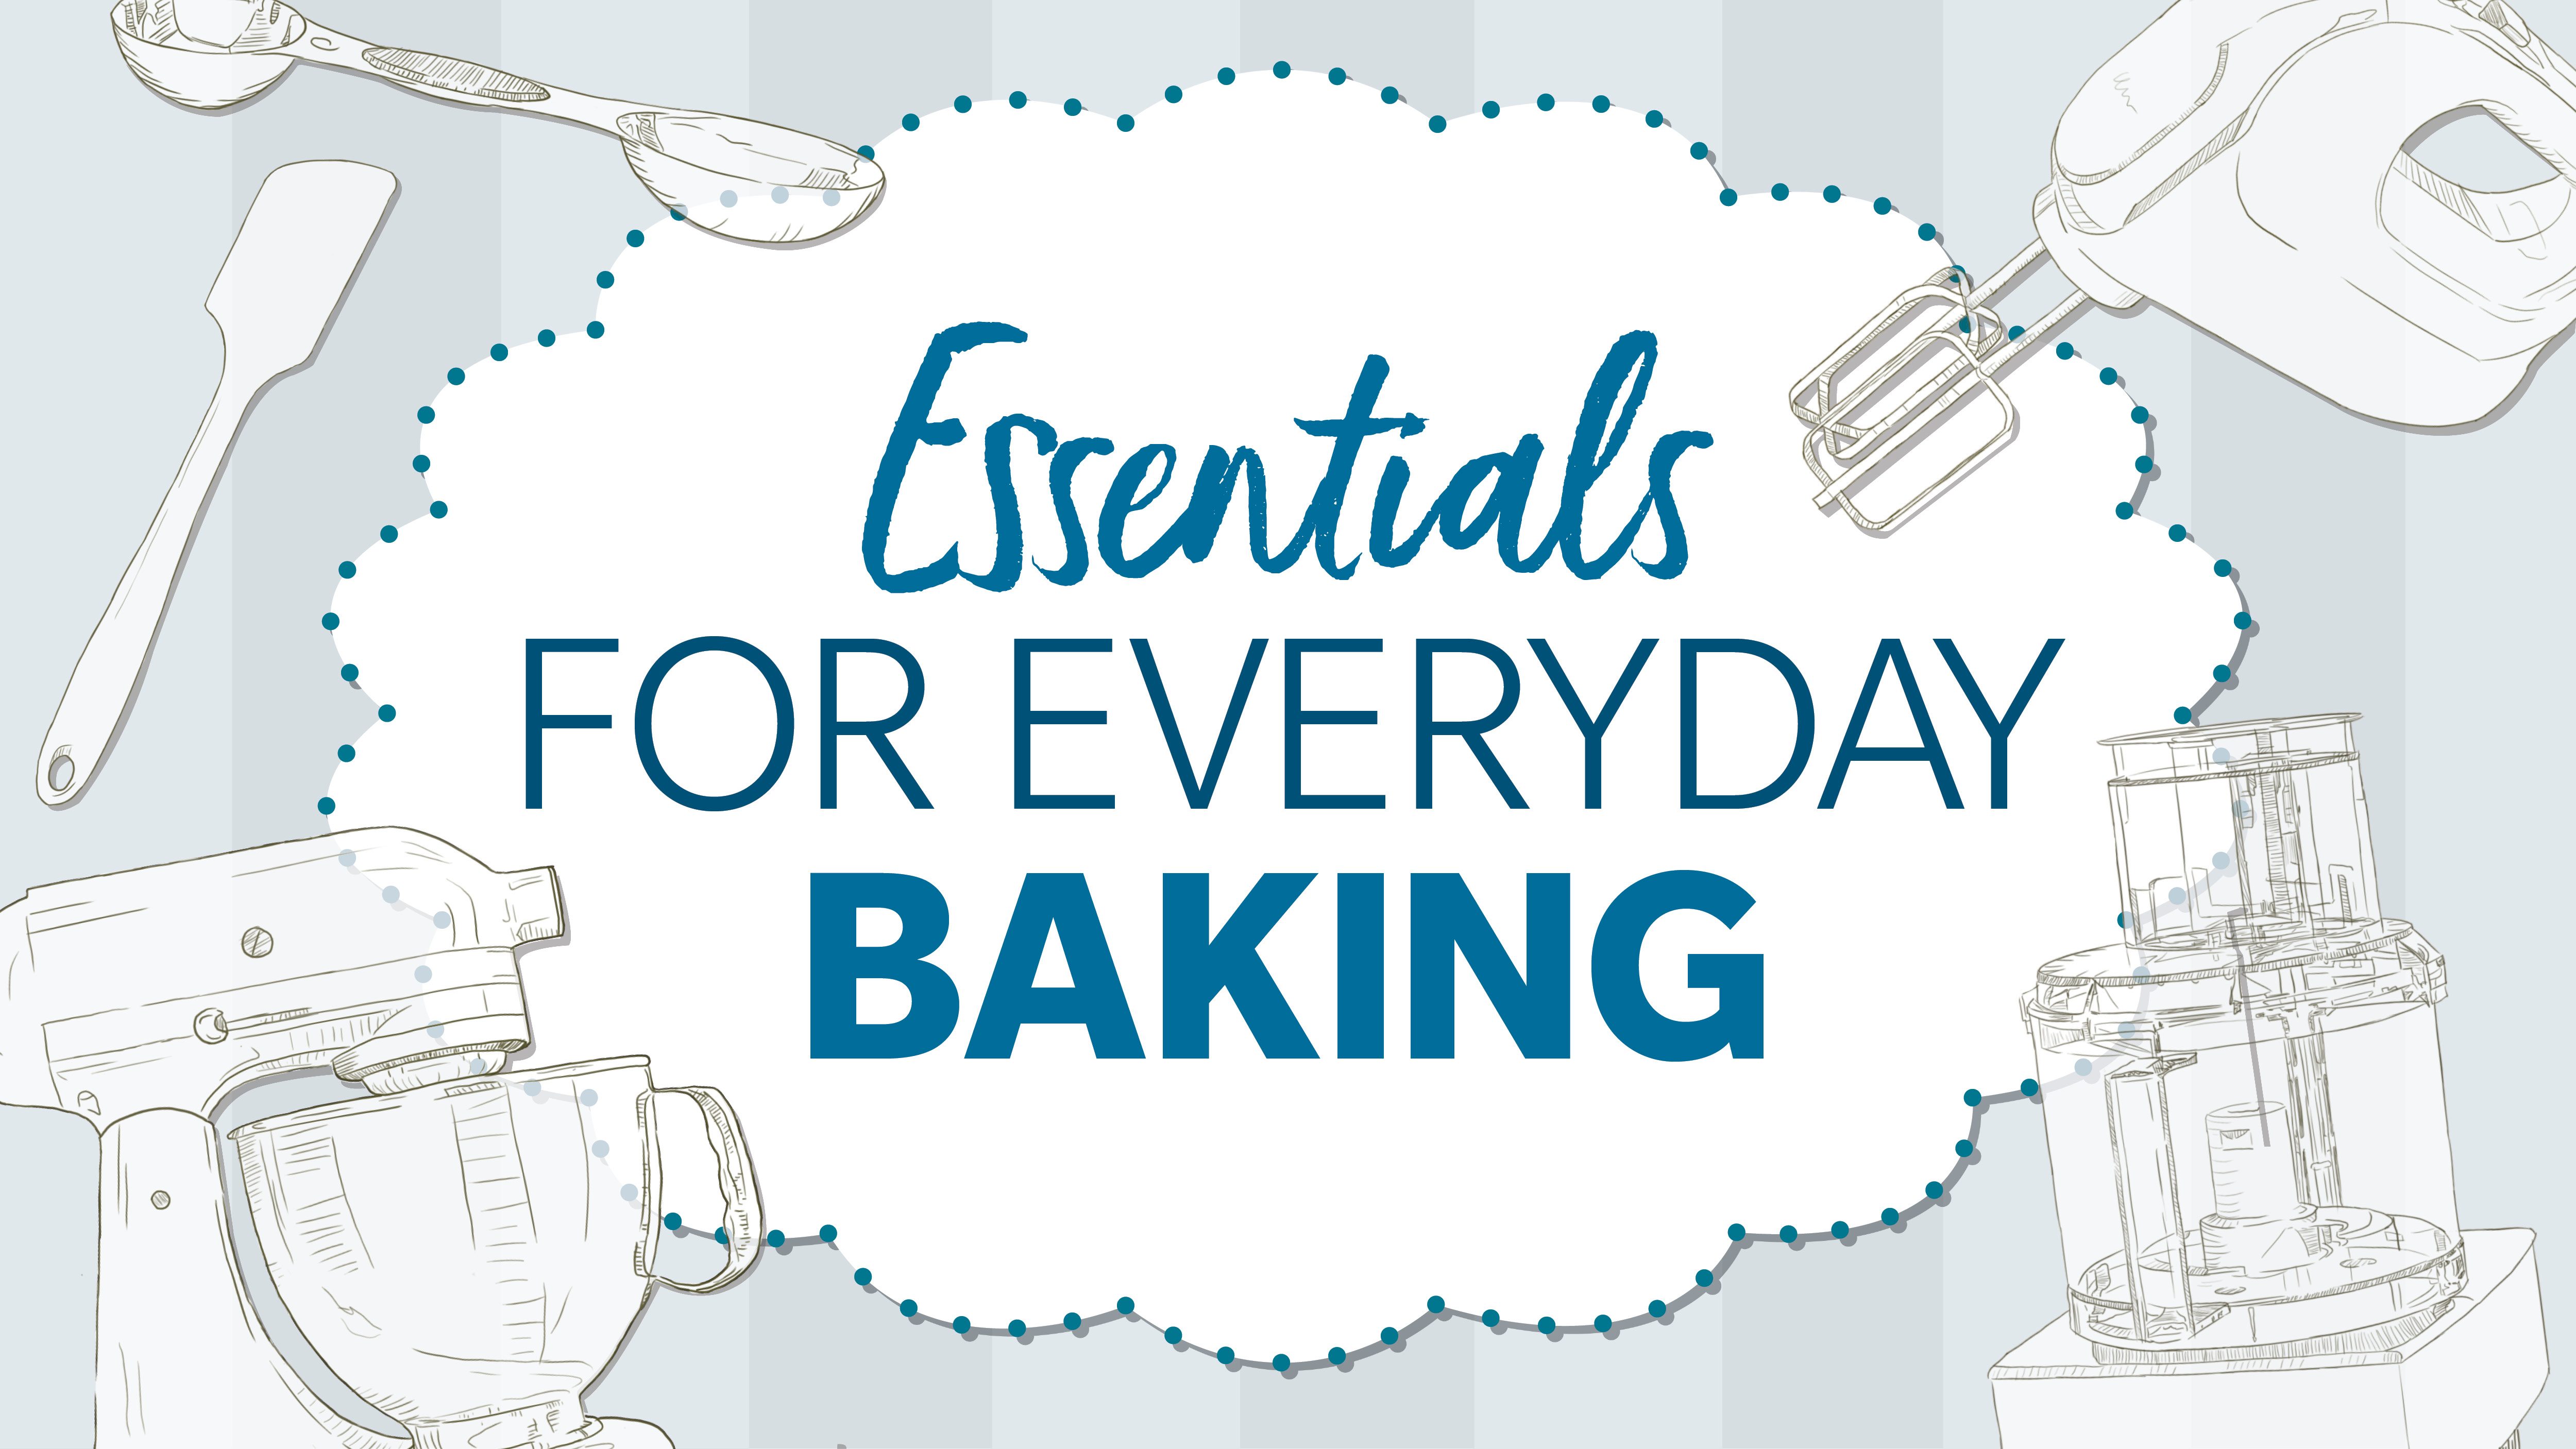 https://www.tasteofhome.com/wp-content/uploads/2019/07/Essentials-for-everyday-baking-social-feature.jpg